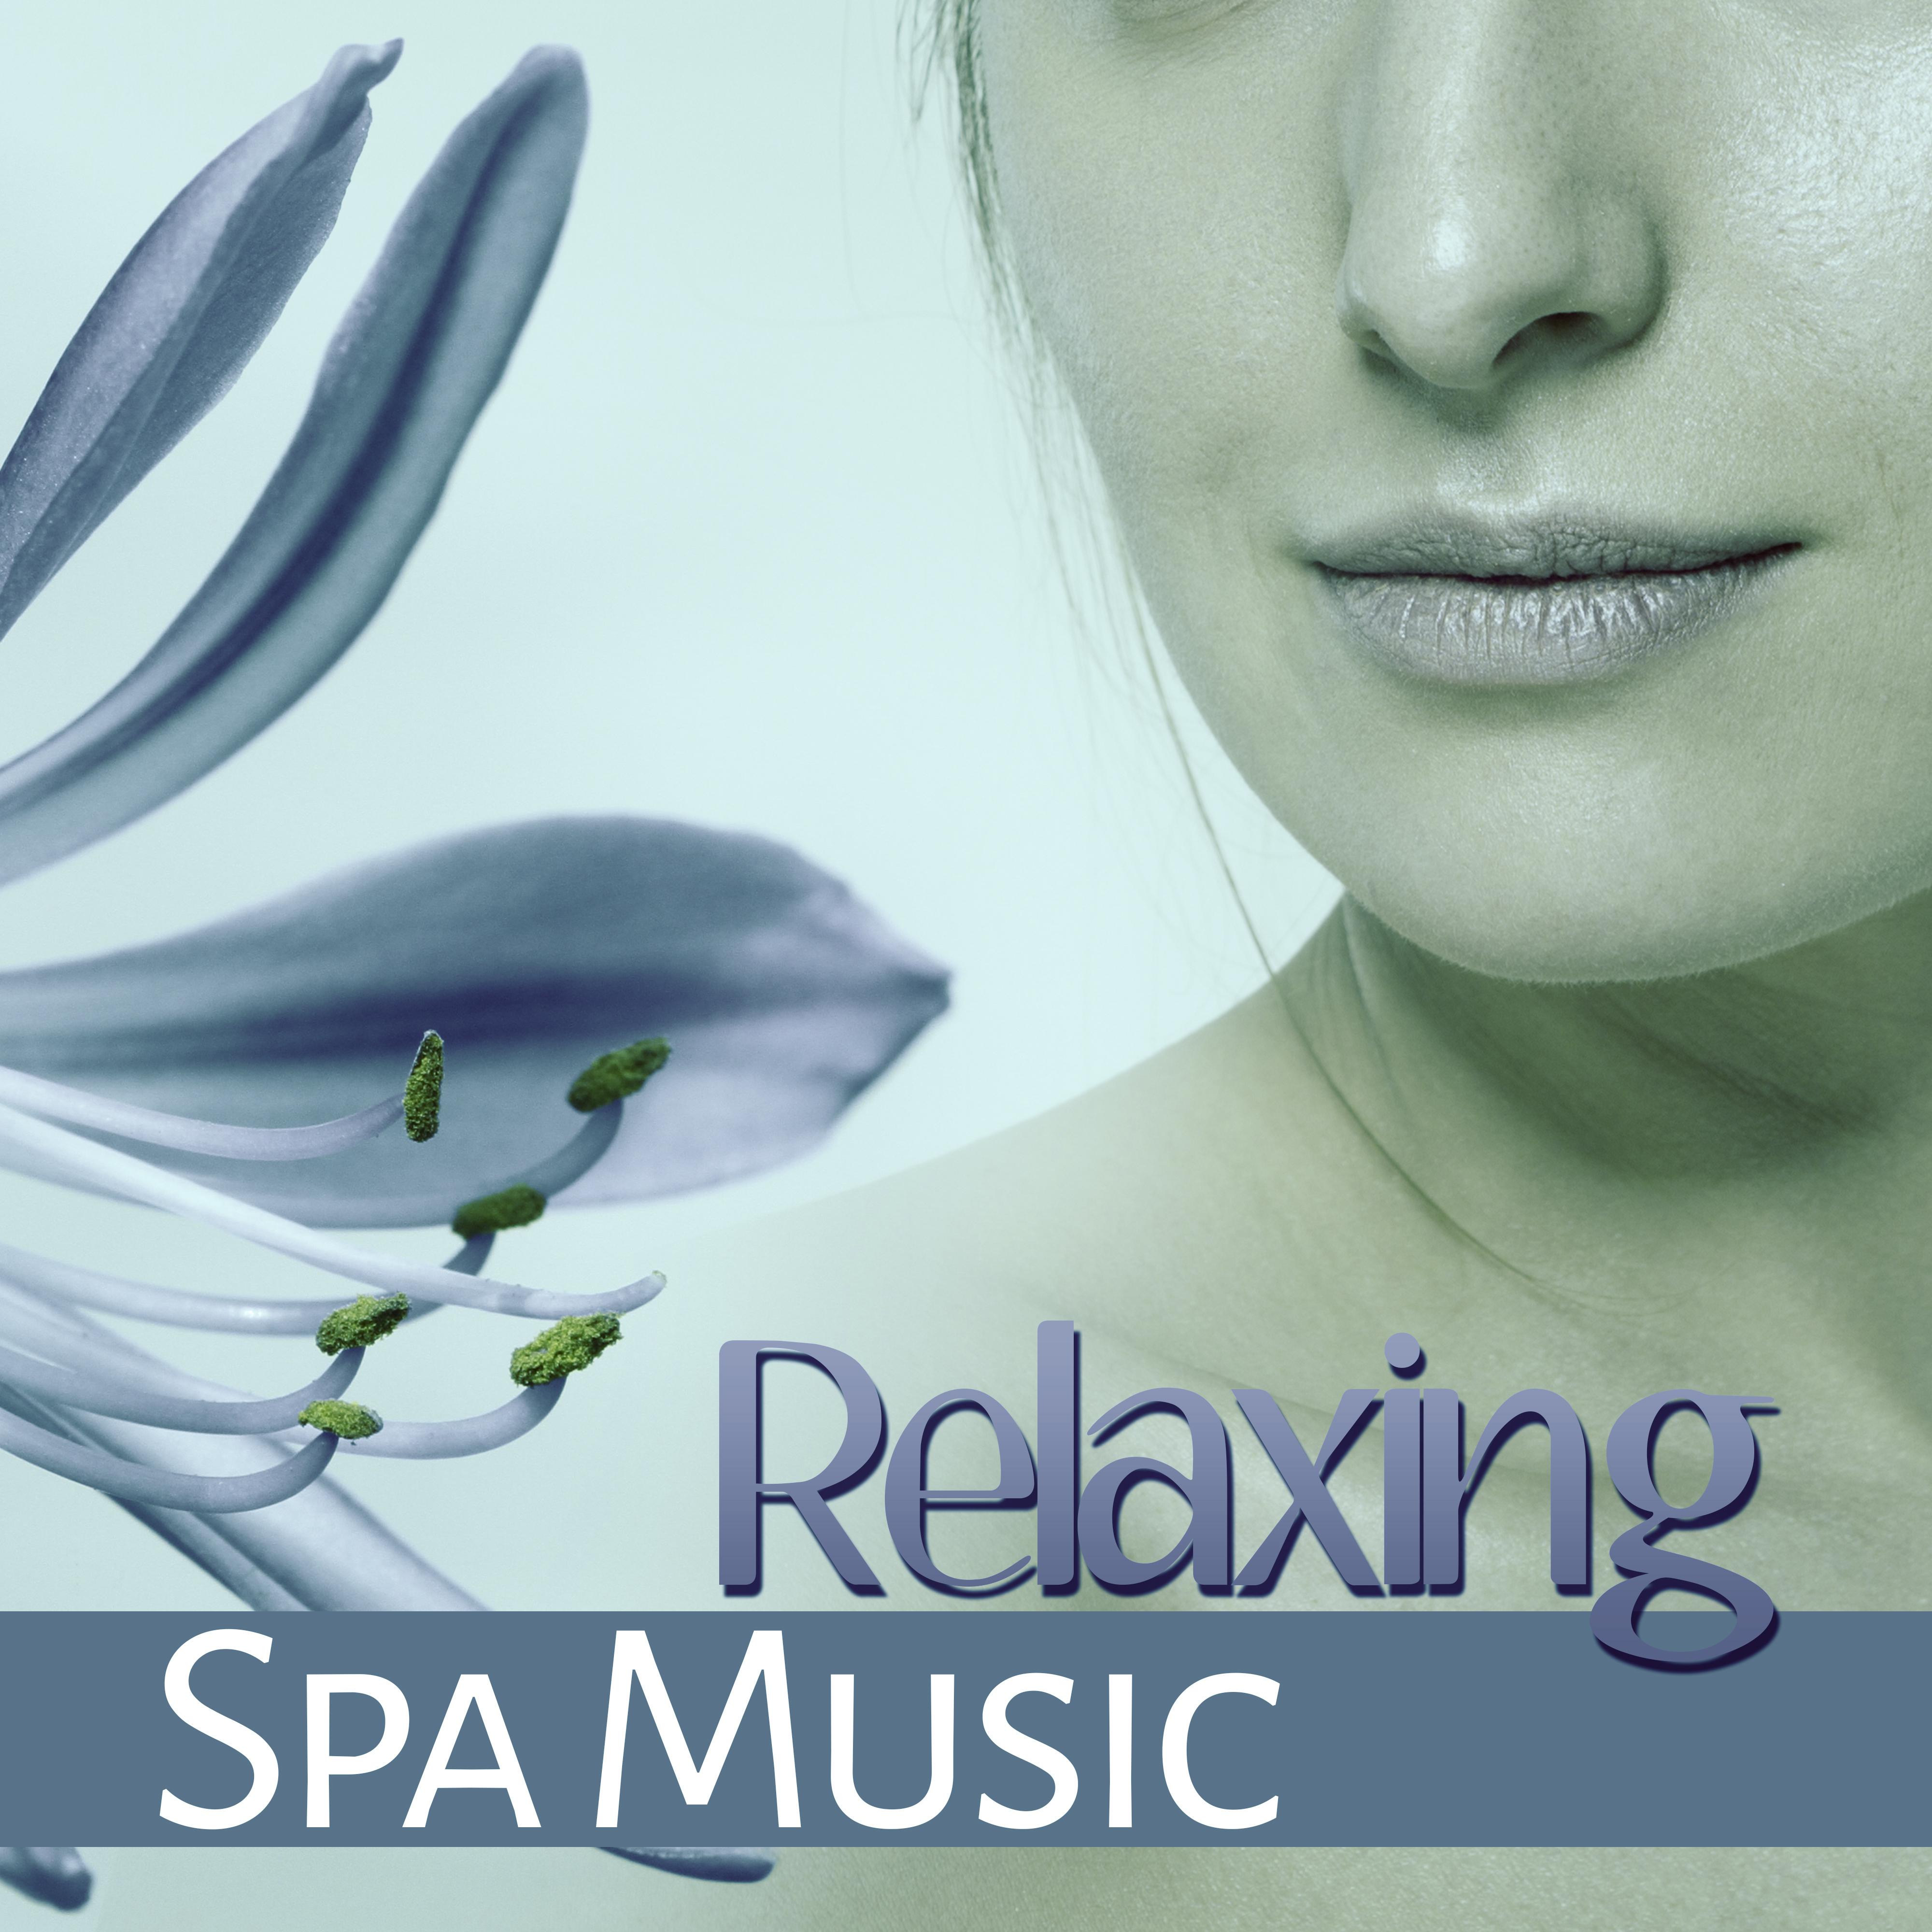 Relaxing Spa Music – Soothing Rain, Gentle Sounds of Nature, Deep Sleep, Dreams, Soft Rain for Wellness, Pure Massage, Better Mood